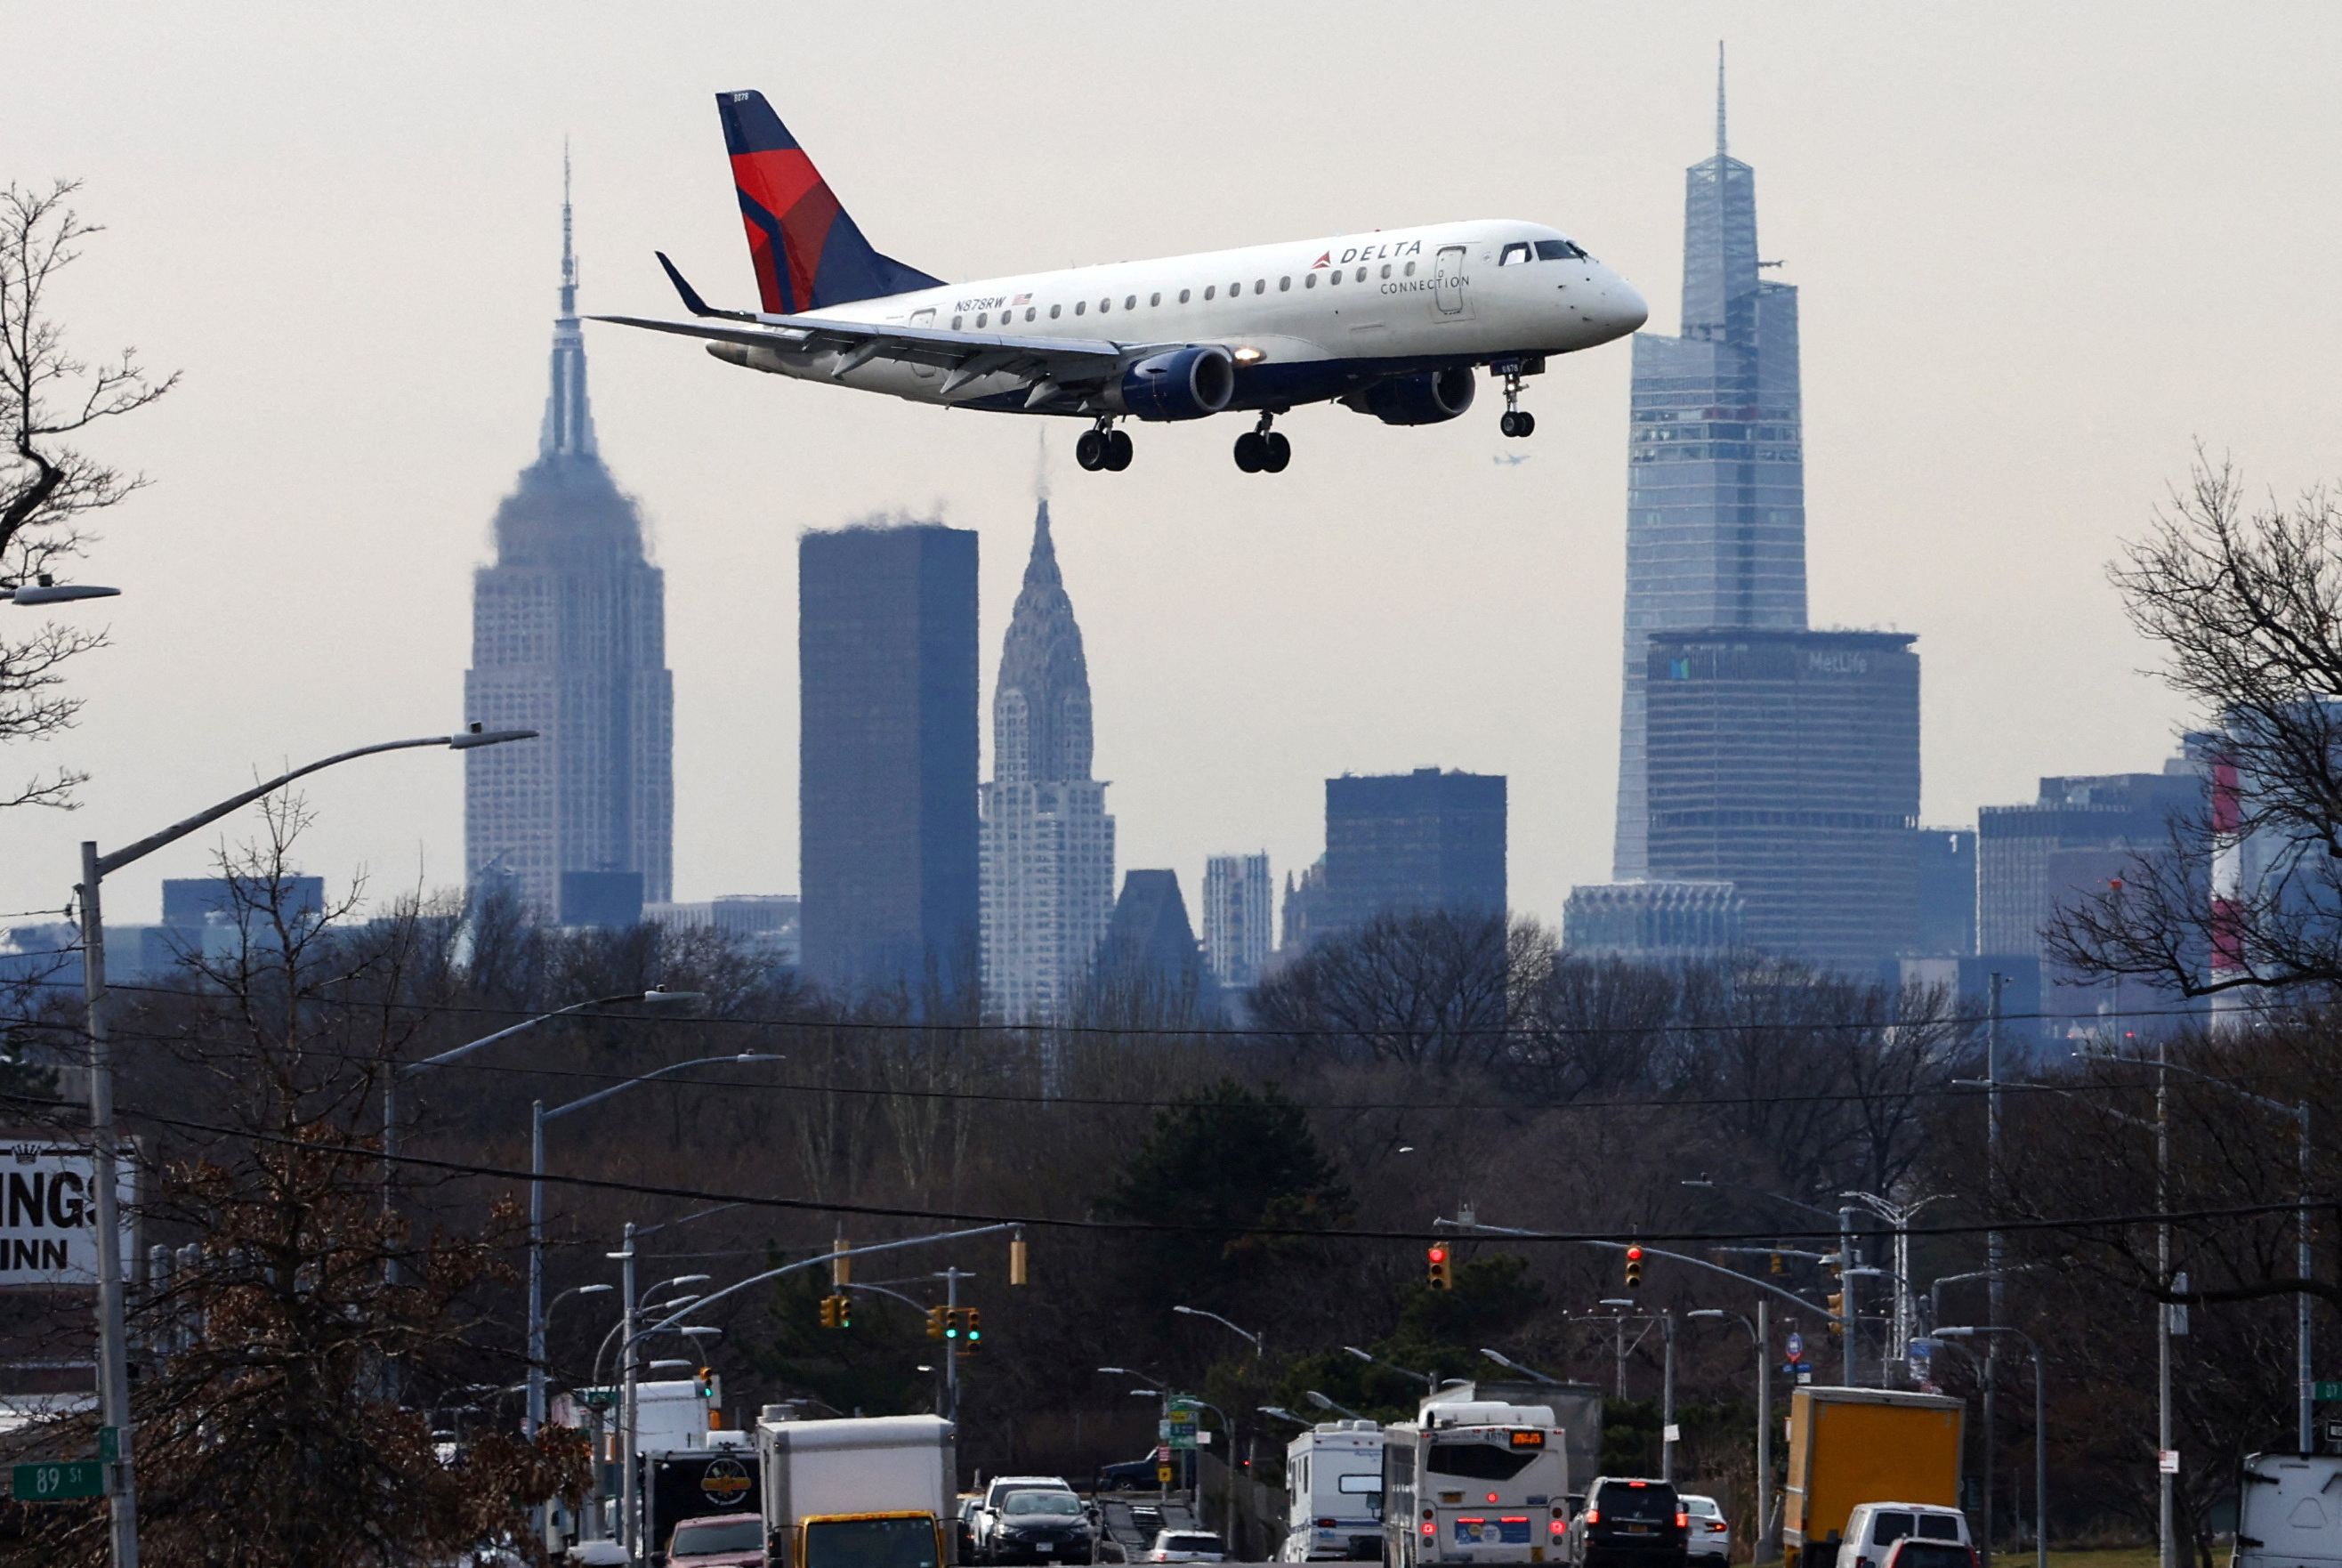 Planes resume flights following an FAA system outage at Laguardia Airport in New York